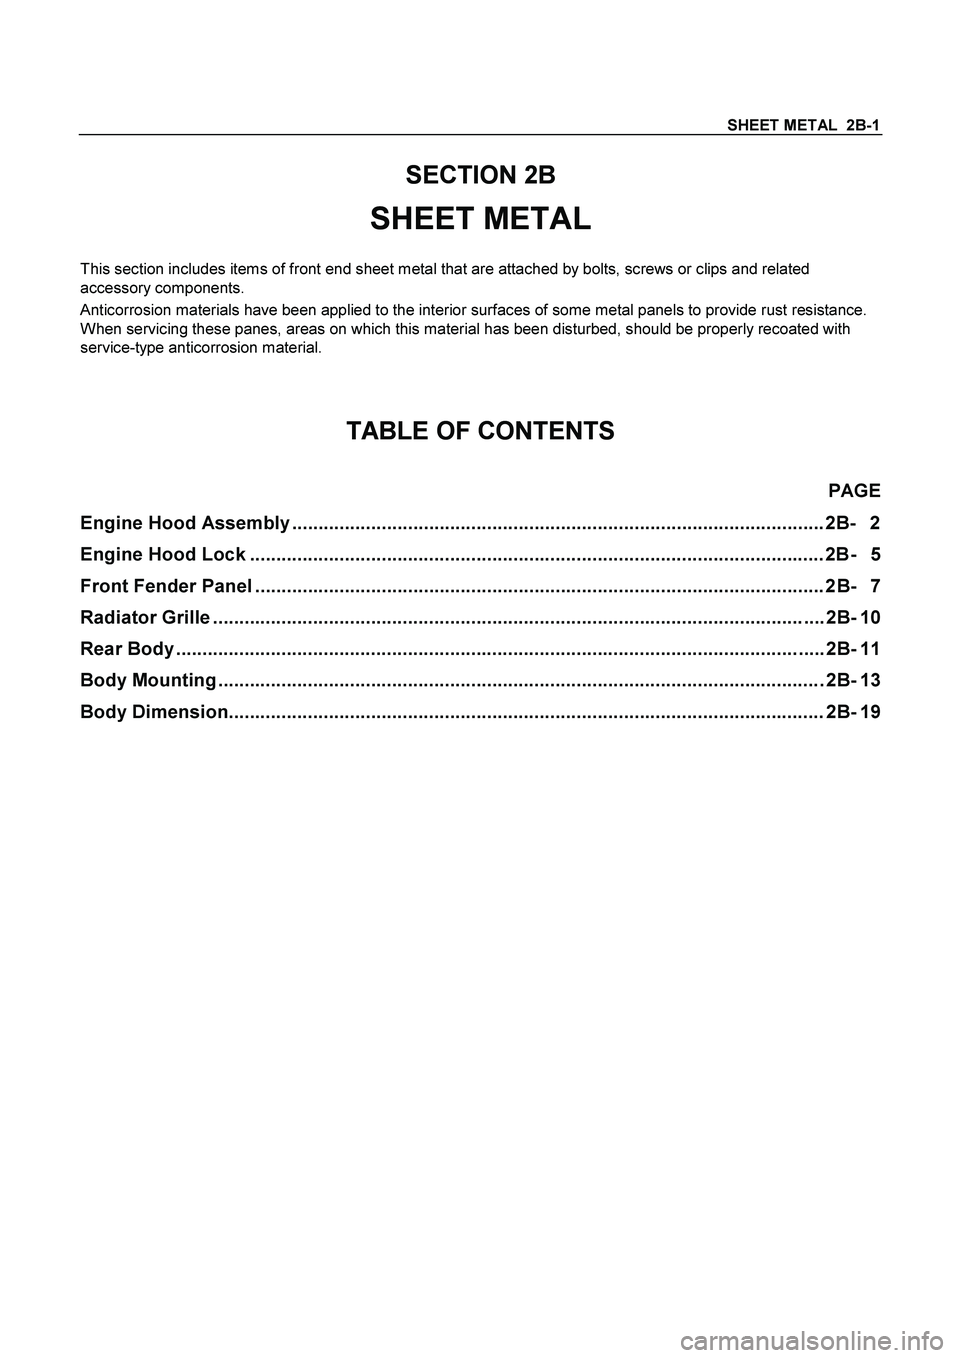 ISUZU TF SERIES 2004  Workshop Manual SHEET METAL  2B-1
 
SECTION 2B 
SHEET METAL 
 
This section includes items of front end sheet metal that are attached by bolts, screws or clips and related 
accessory components. 
Anticorrosion materi